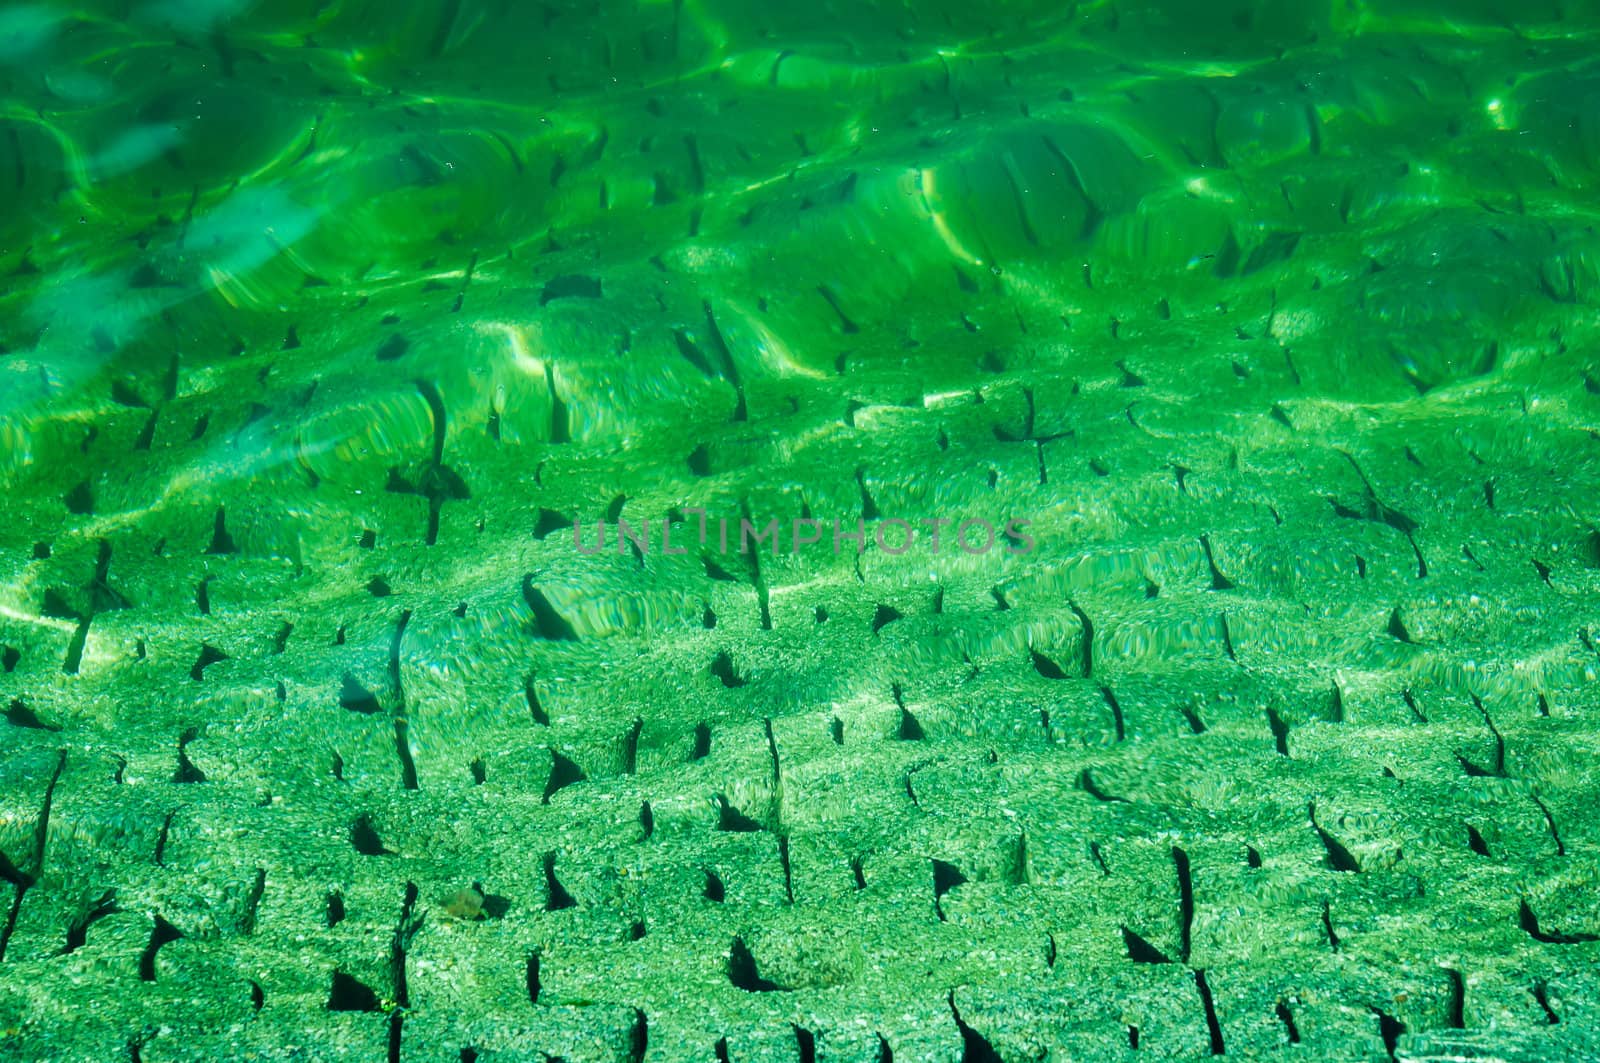 Green water ripple on cement ground by moggara12